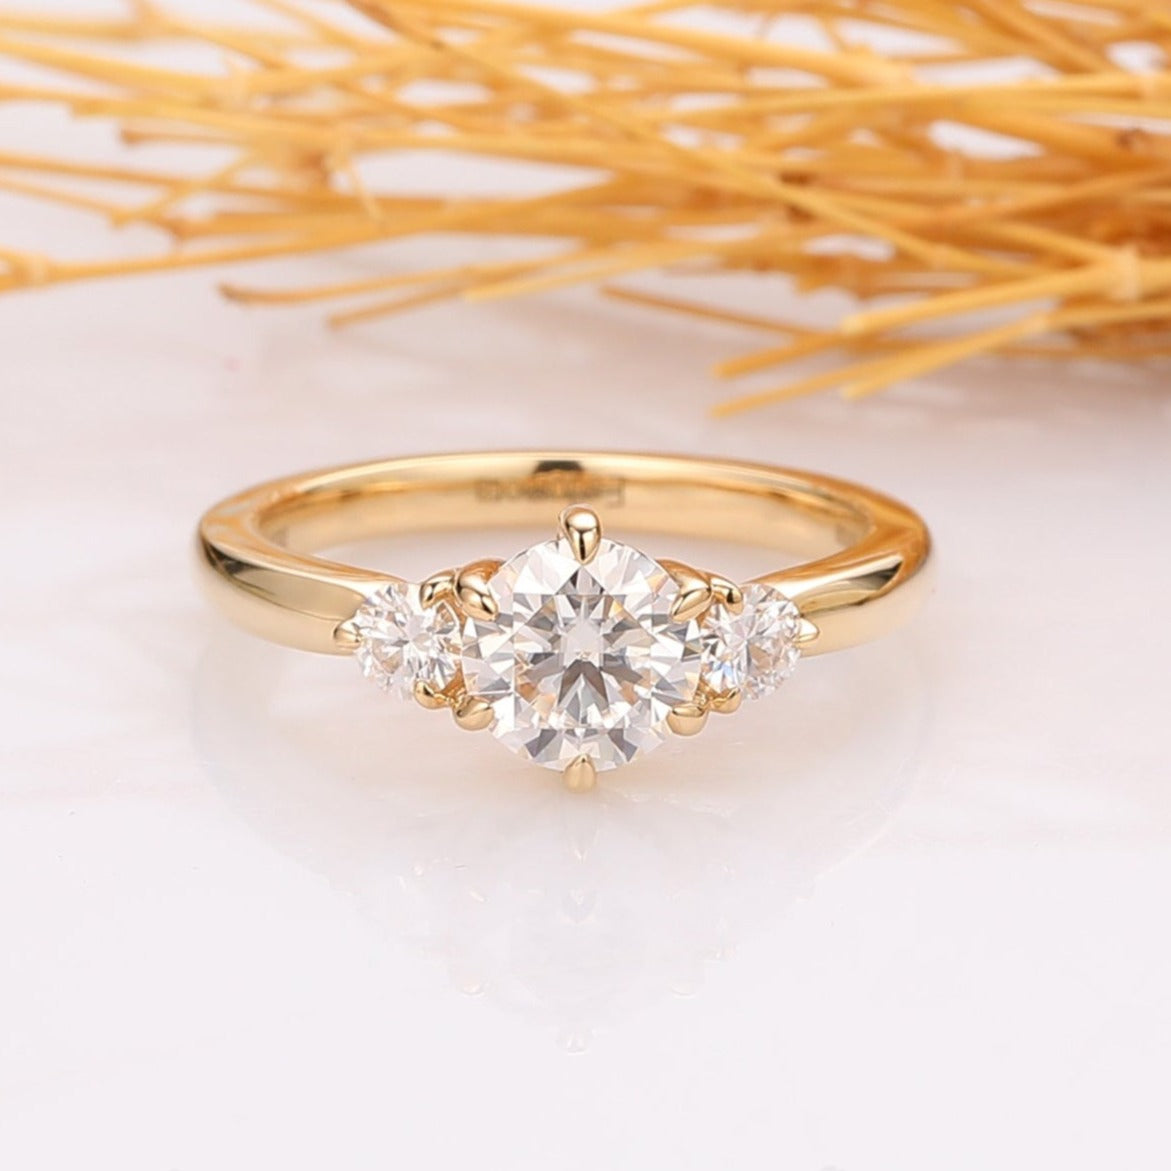 Unique 3 Stone Moissanite Engagement Ring, 14k Yellow Gold Ring